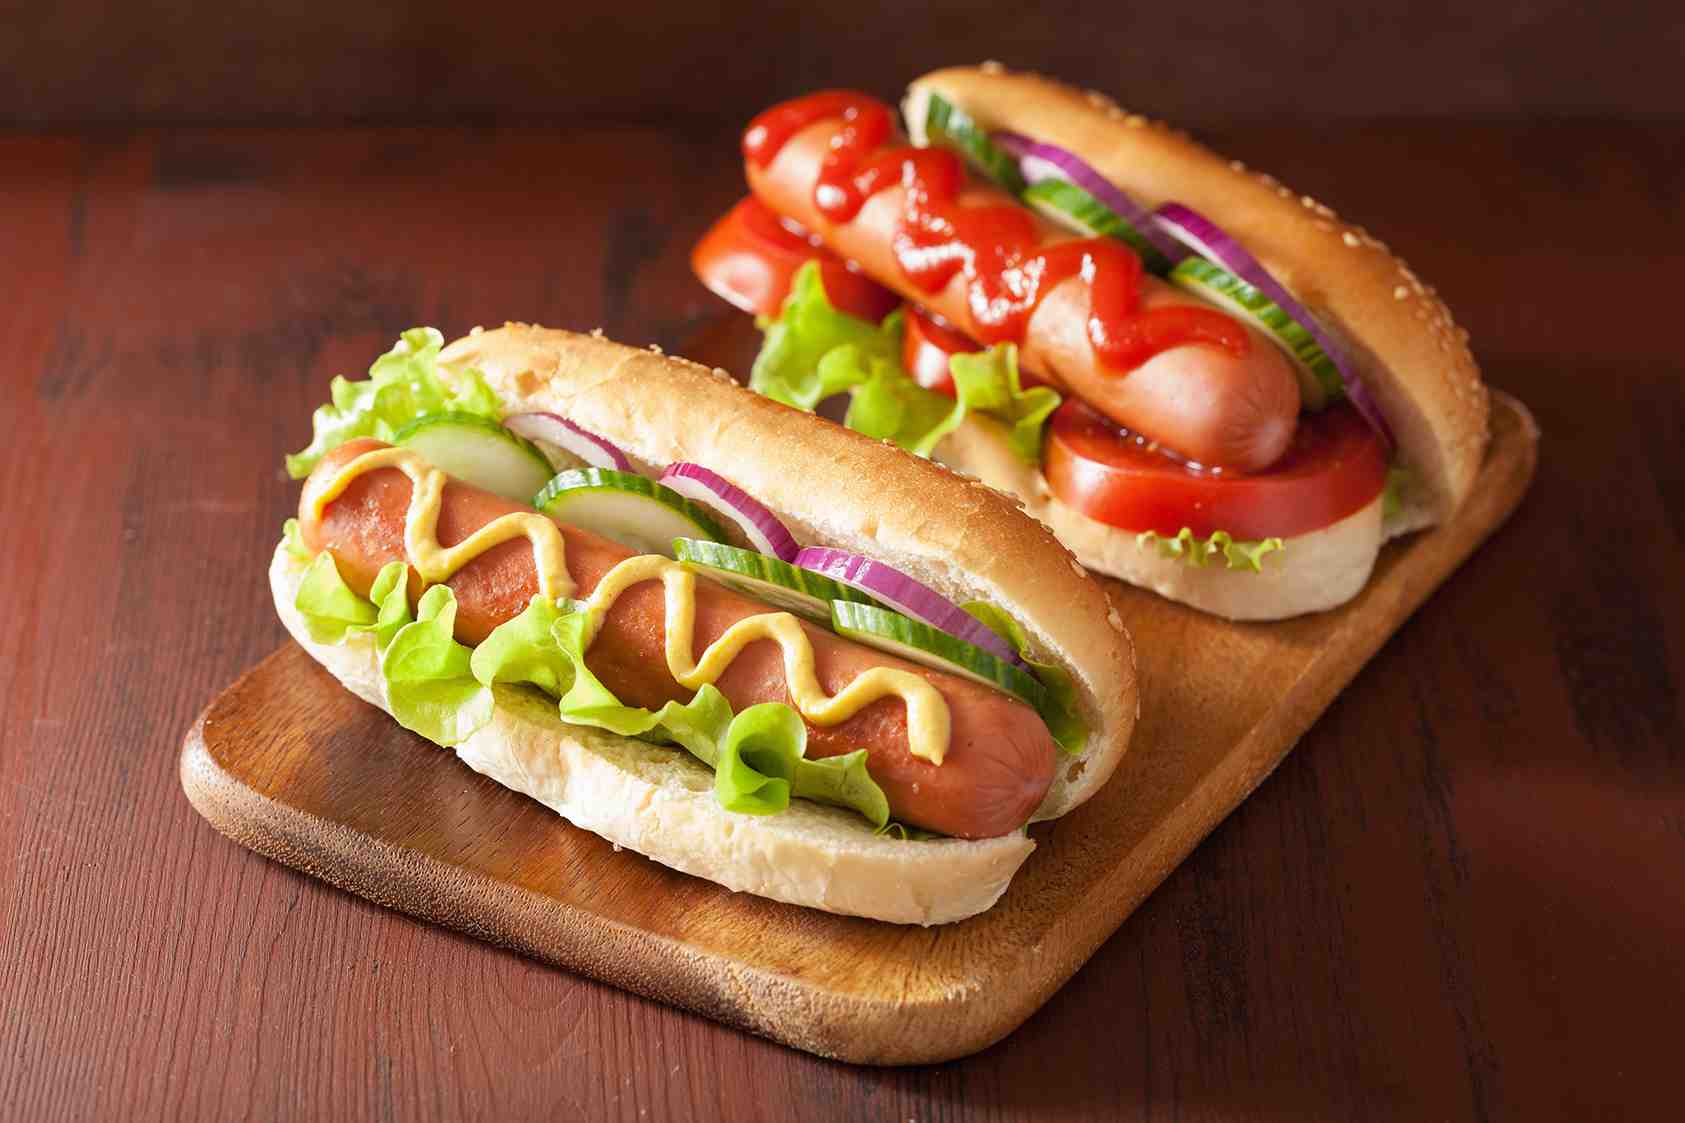 Do hot dogs contain bugs?